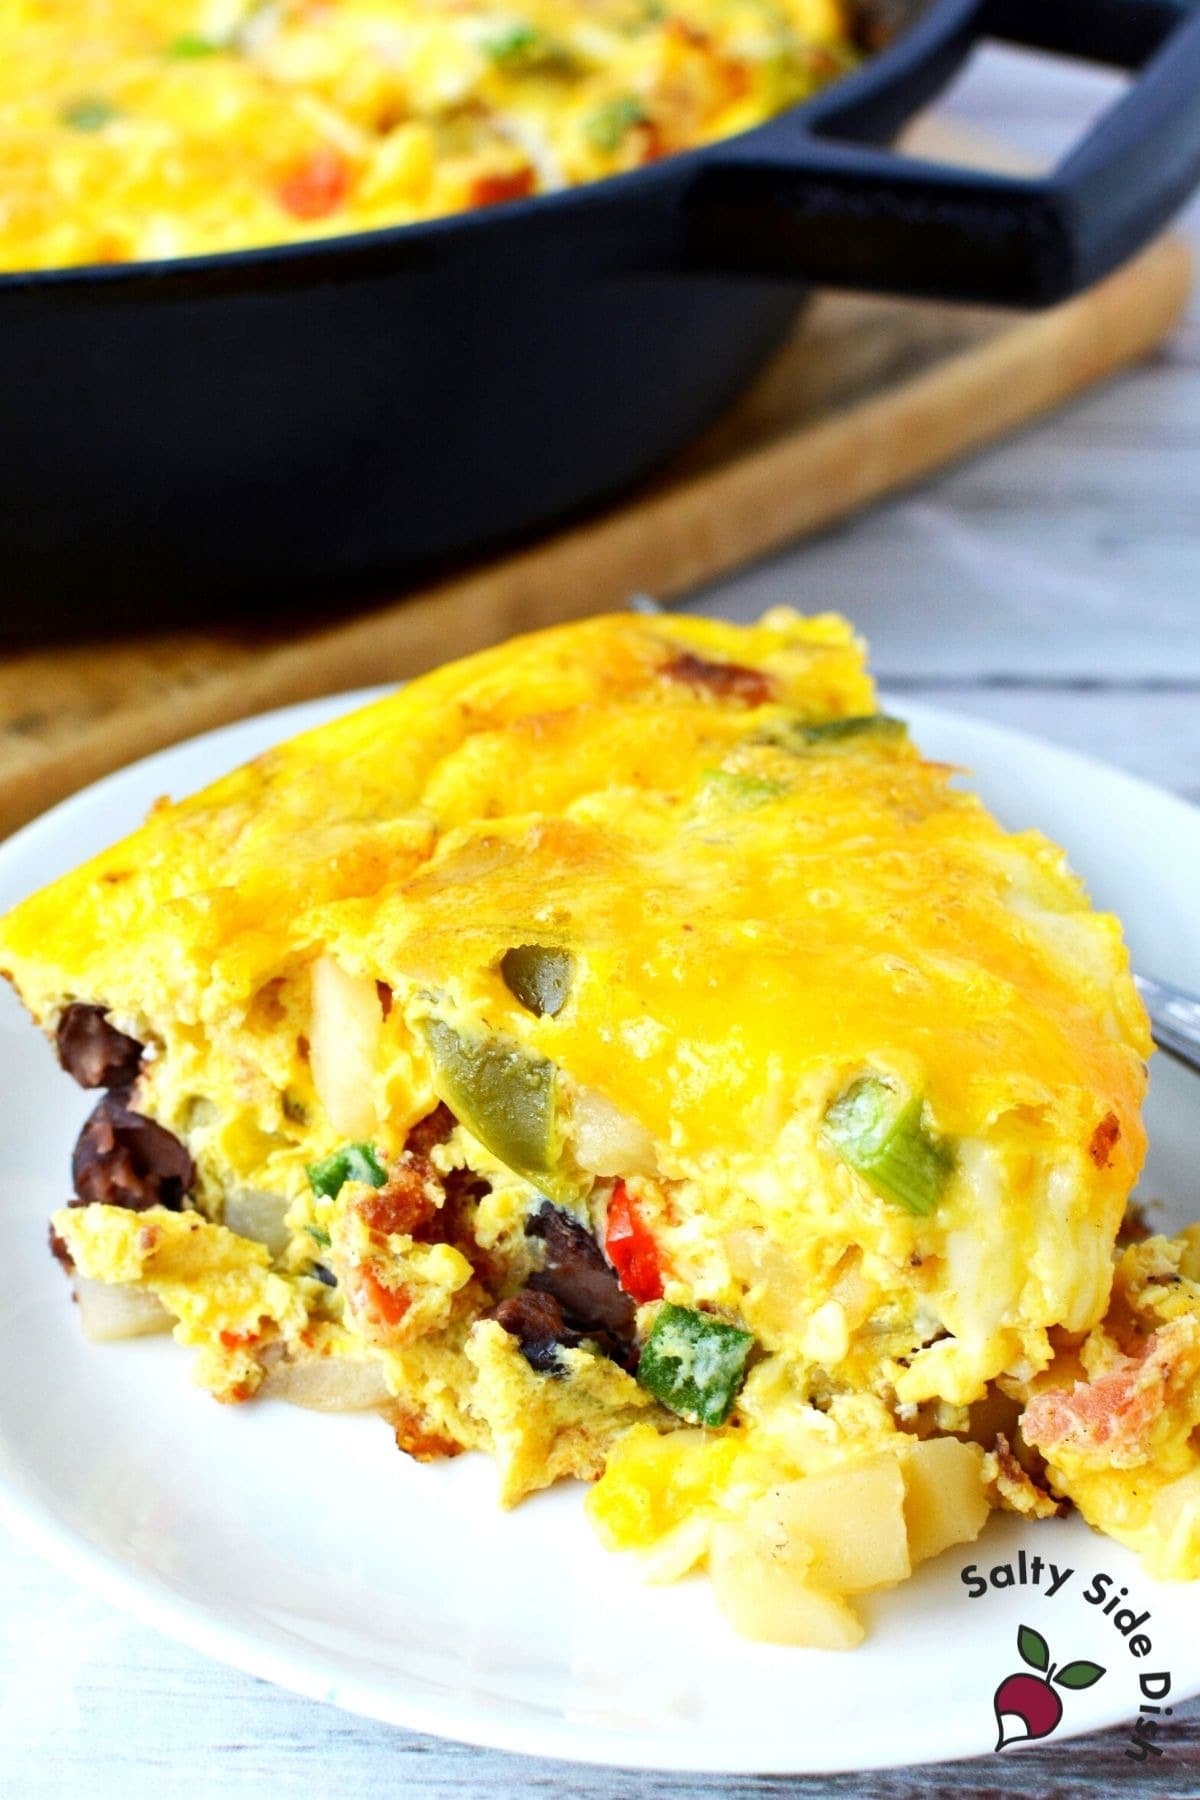 Slice of egg casserole with bacon, bell peppers, diced Russet potatoes, black beans, and plenty of cheese